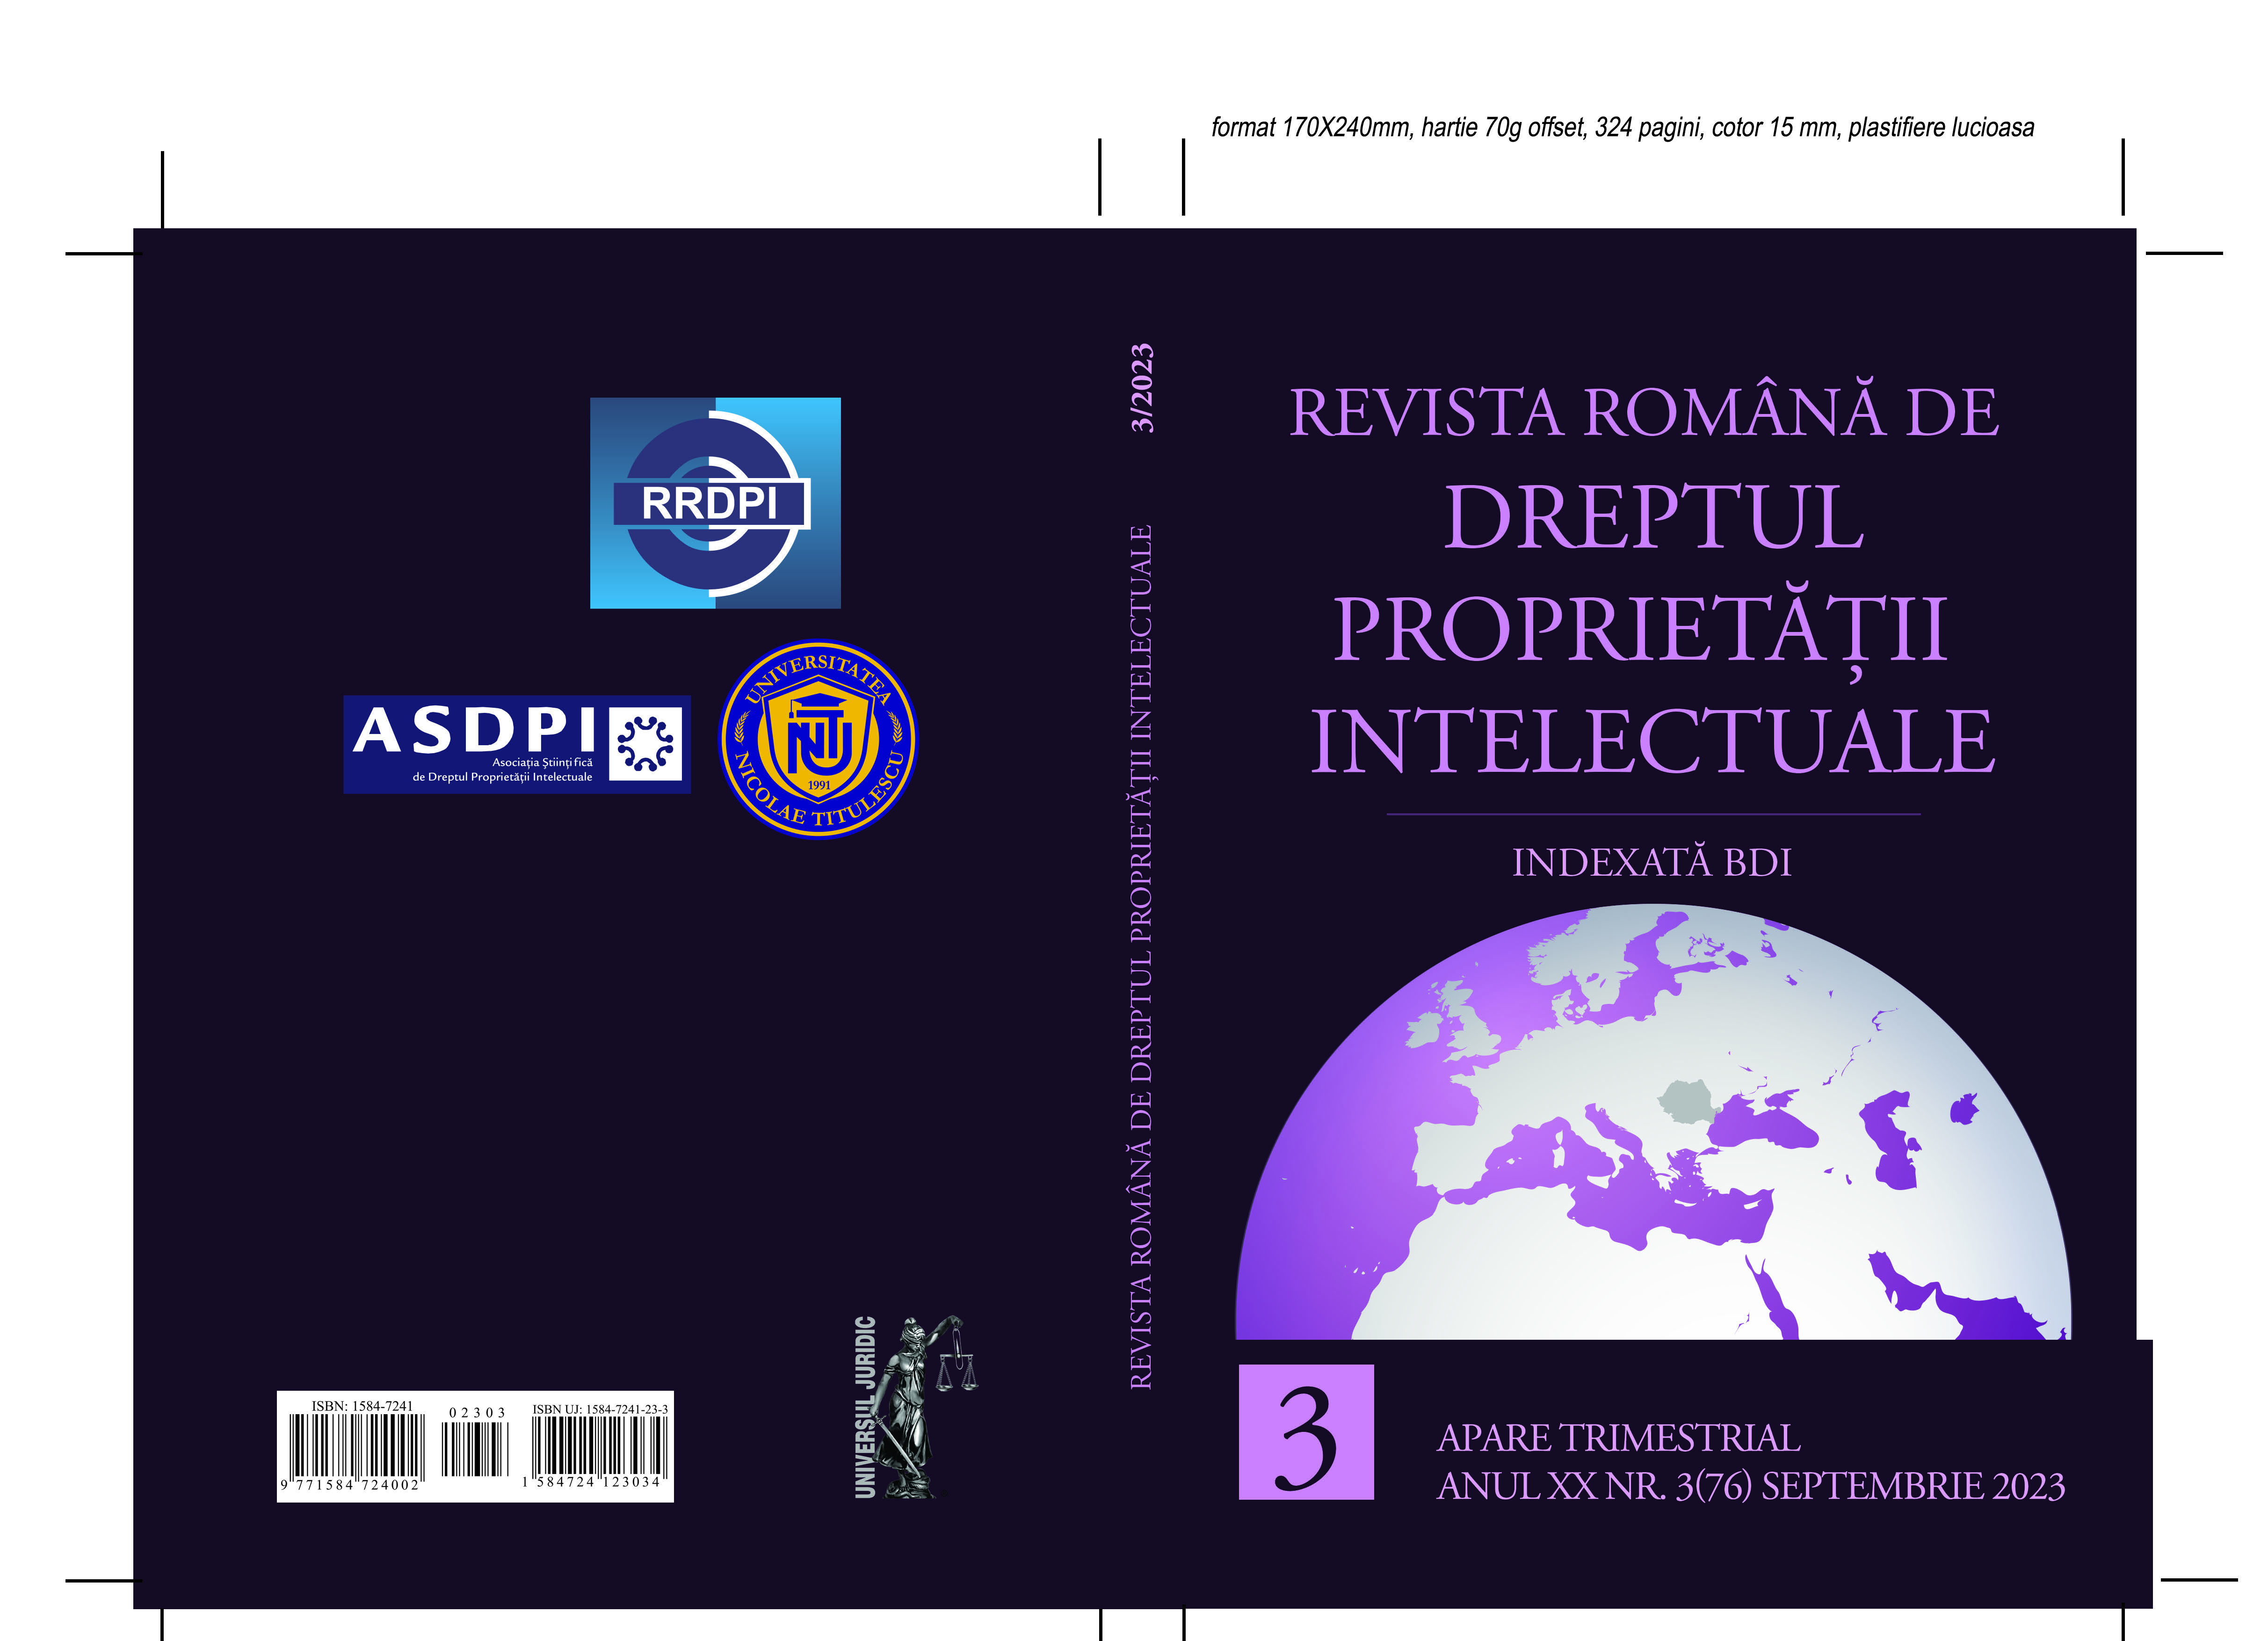 The protection of perfume and intellectual property right Cover Image